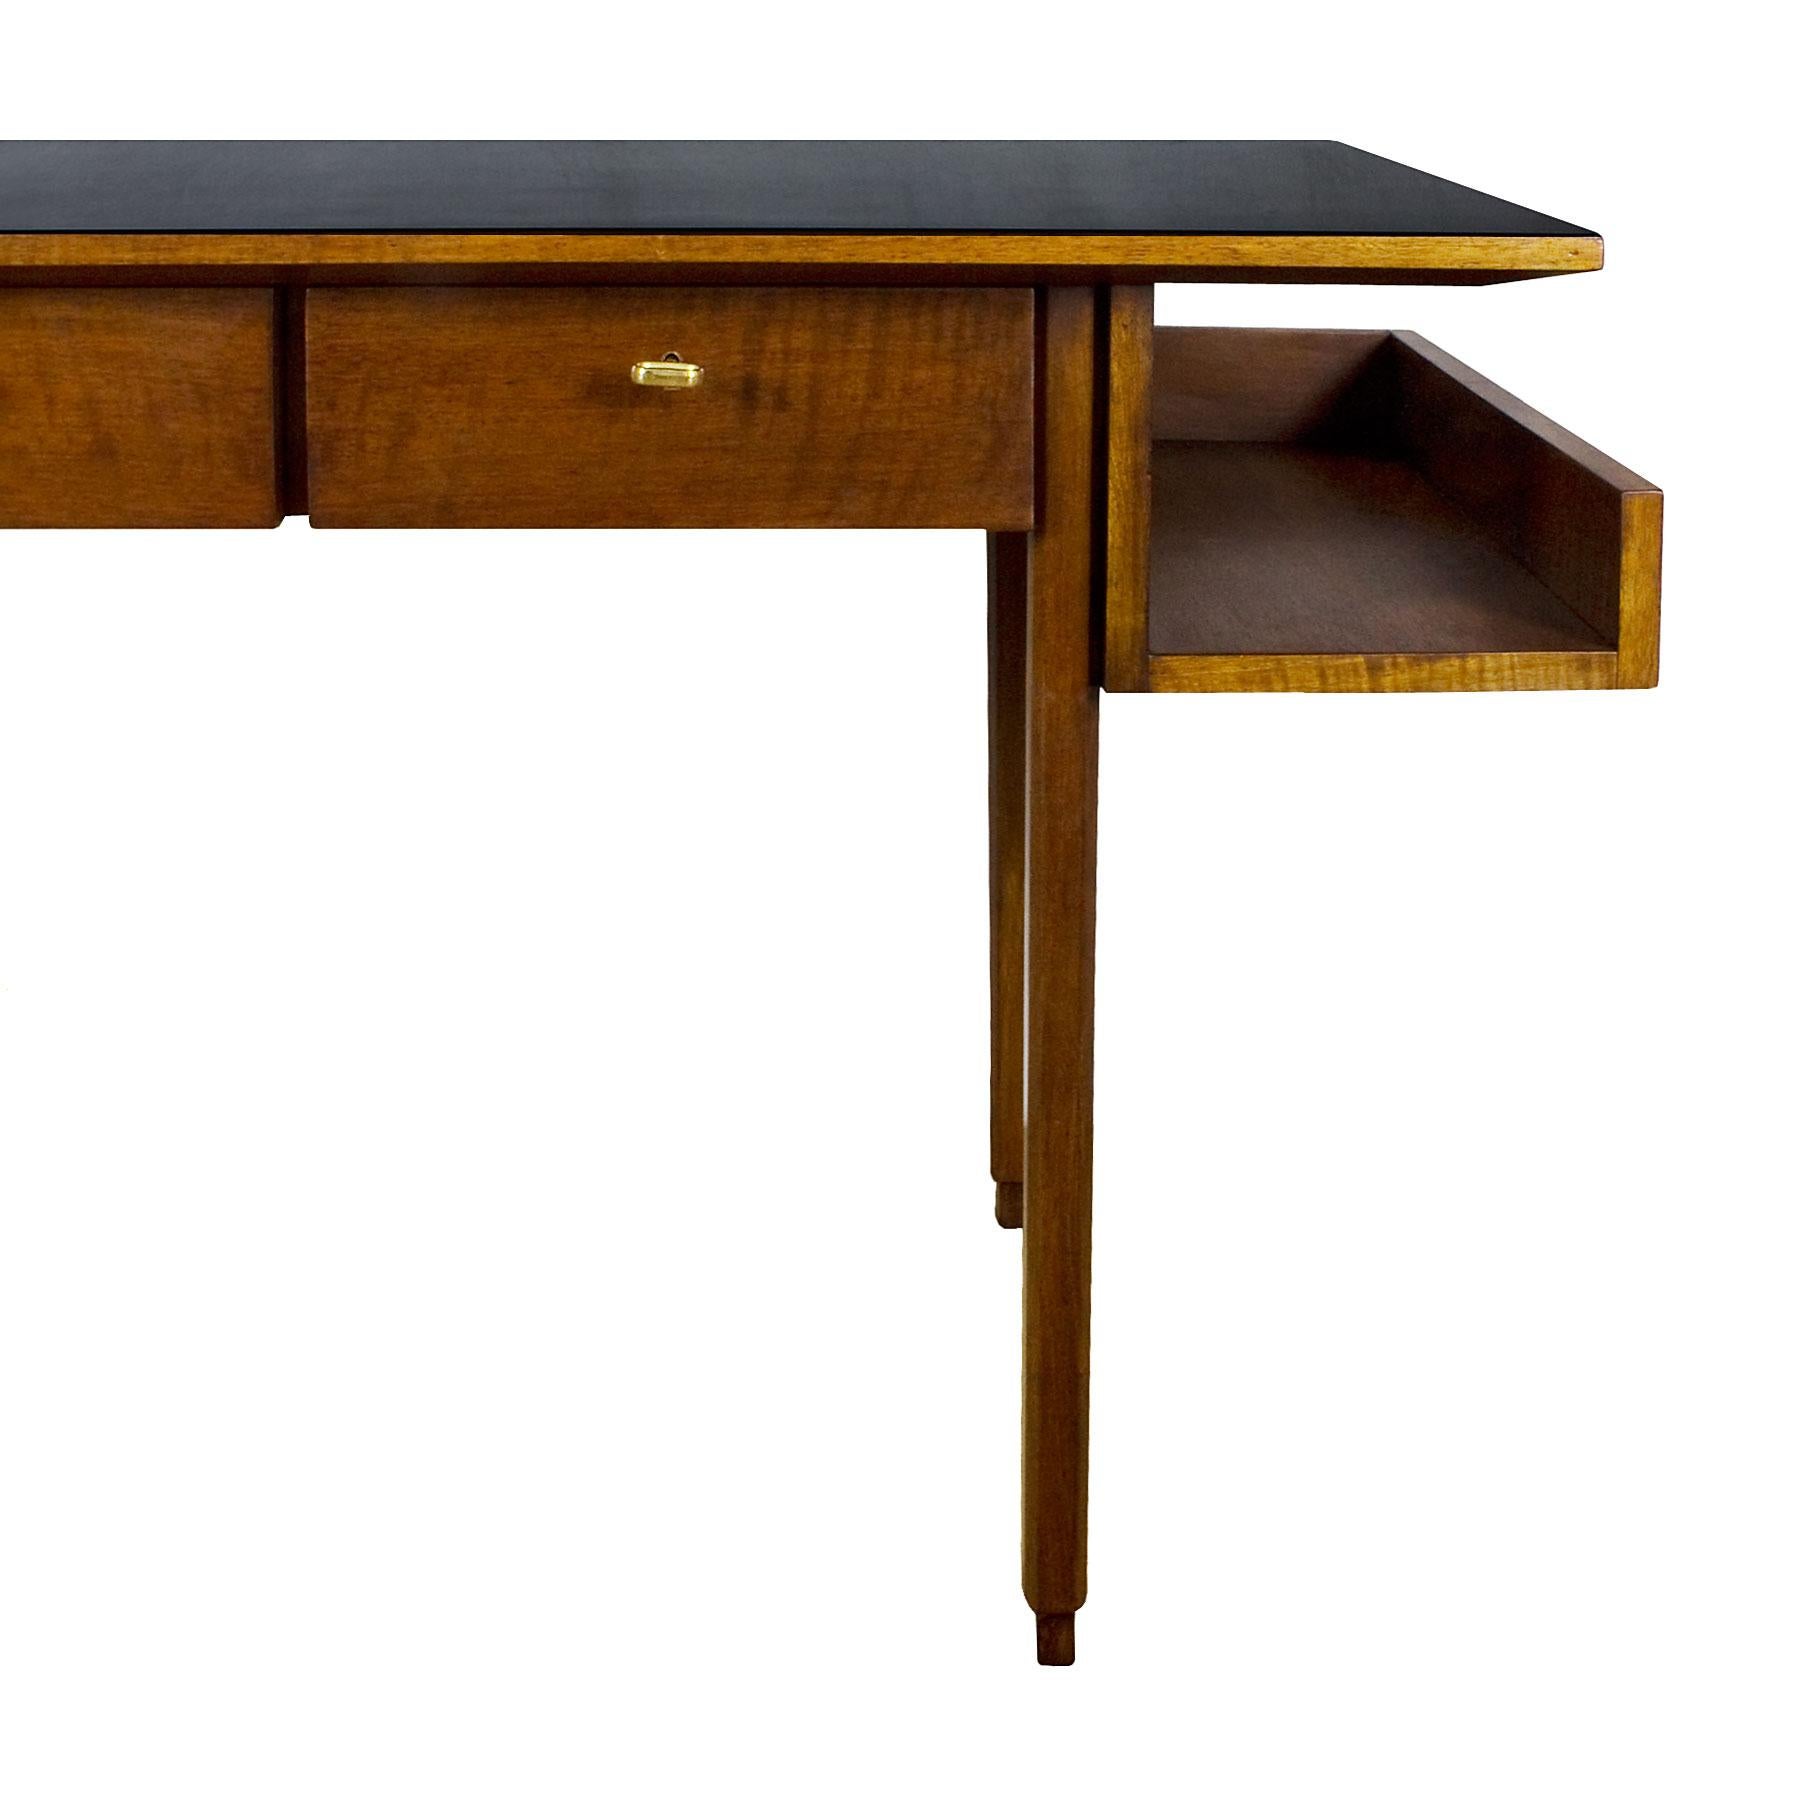 1970s Rationalist Desk by Pietro Bossi, Waxed Walnut, Brass, Formica, Italy 1